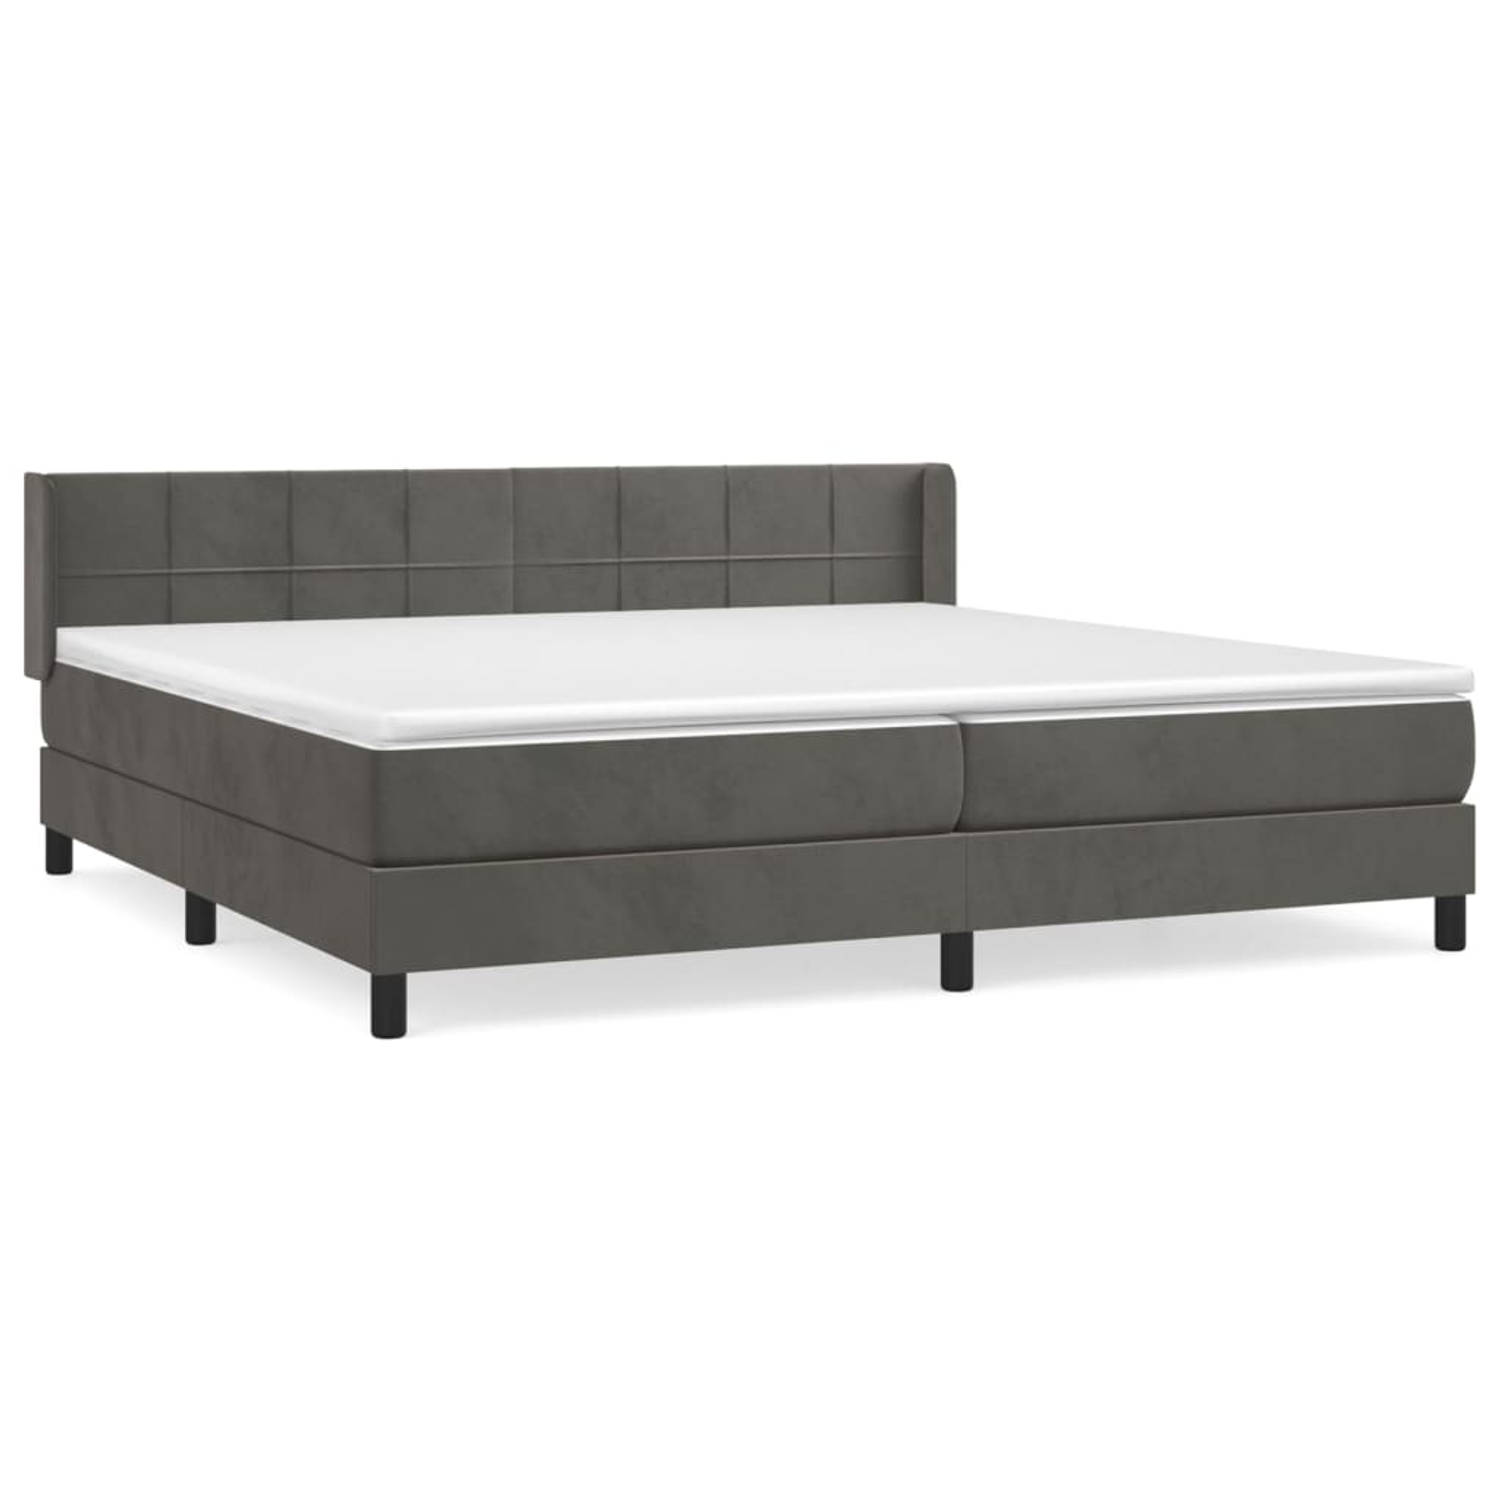 The Living Store Boxspringbed - The Living Store - Bed - 203 x 203 x 78/88 cm - Fluweel donkergrijs - Pocketvering - Middelhard - Topmatras inclusief - 100 x 200 x 20 cm - Wit en d